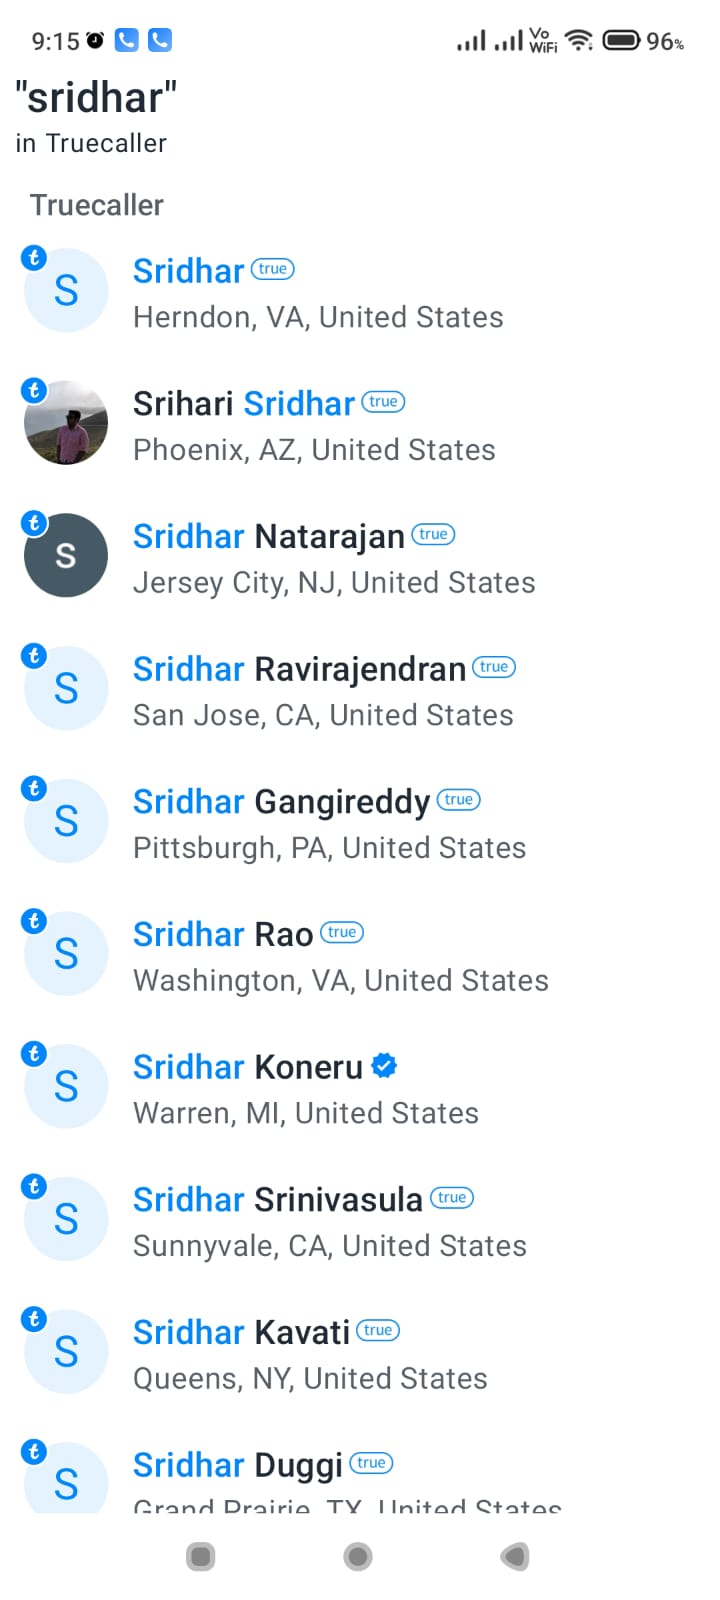 How to do Truecaller Search in 2 Different Ways